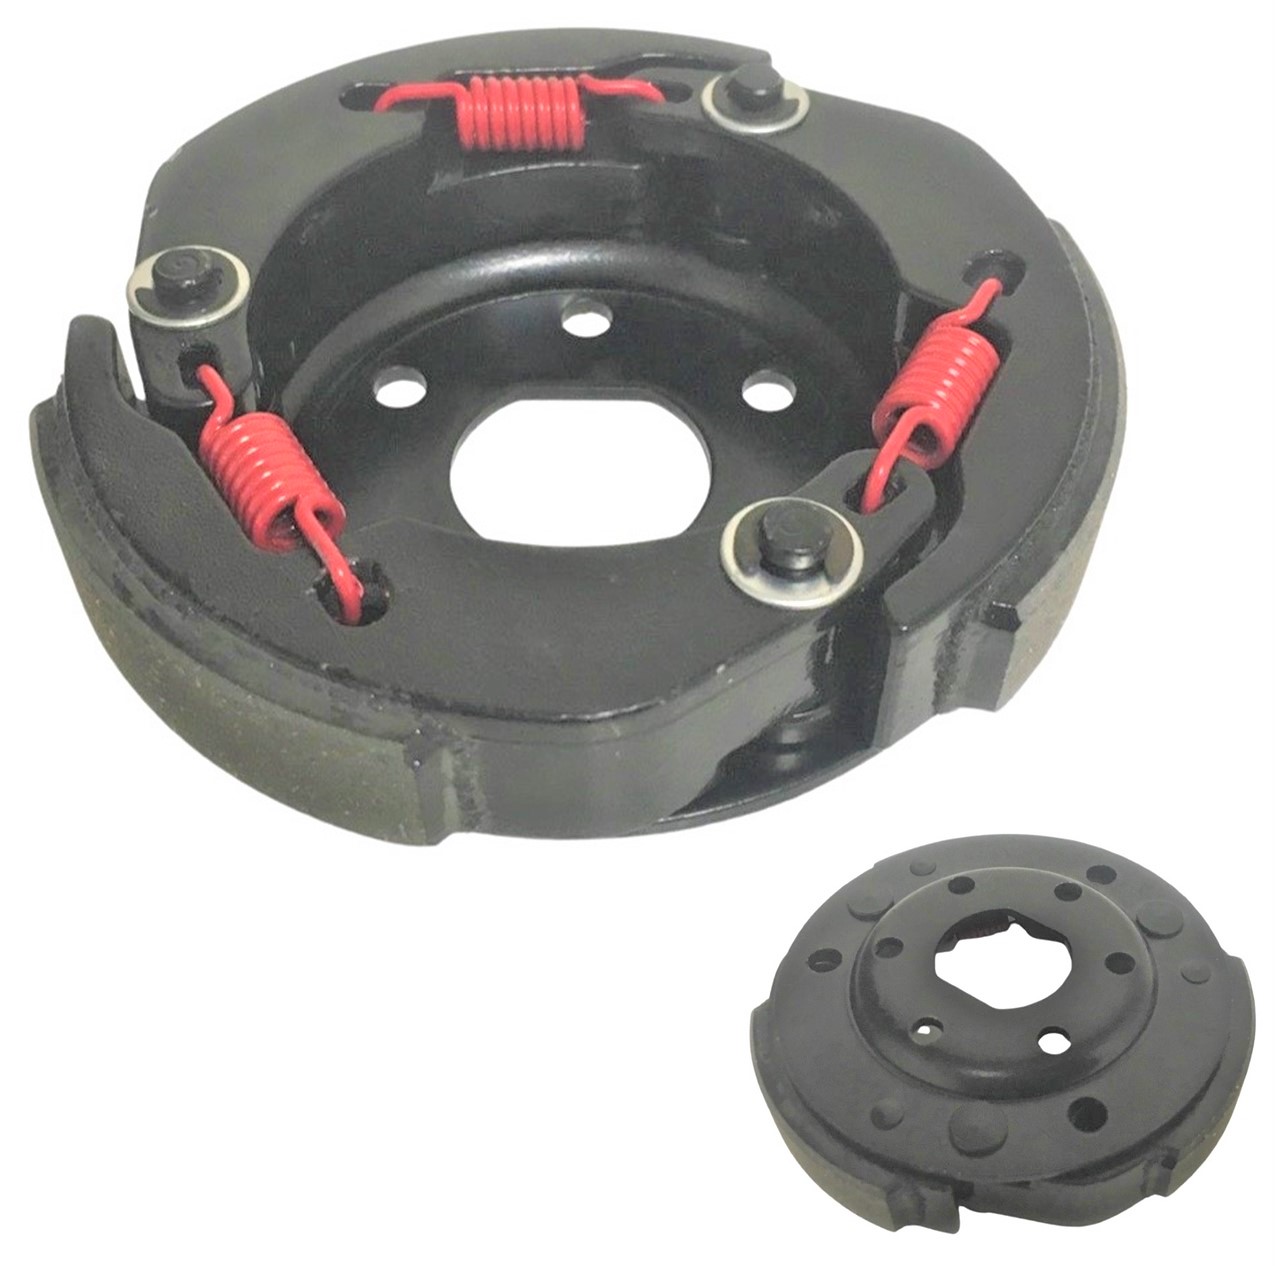 Inner Clutch 105mm HIGH PERFORMANCE RED Spring GY6-50 QMB139 49cc Chinese Scooter Motors